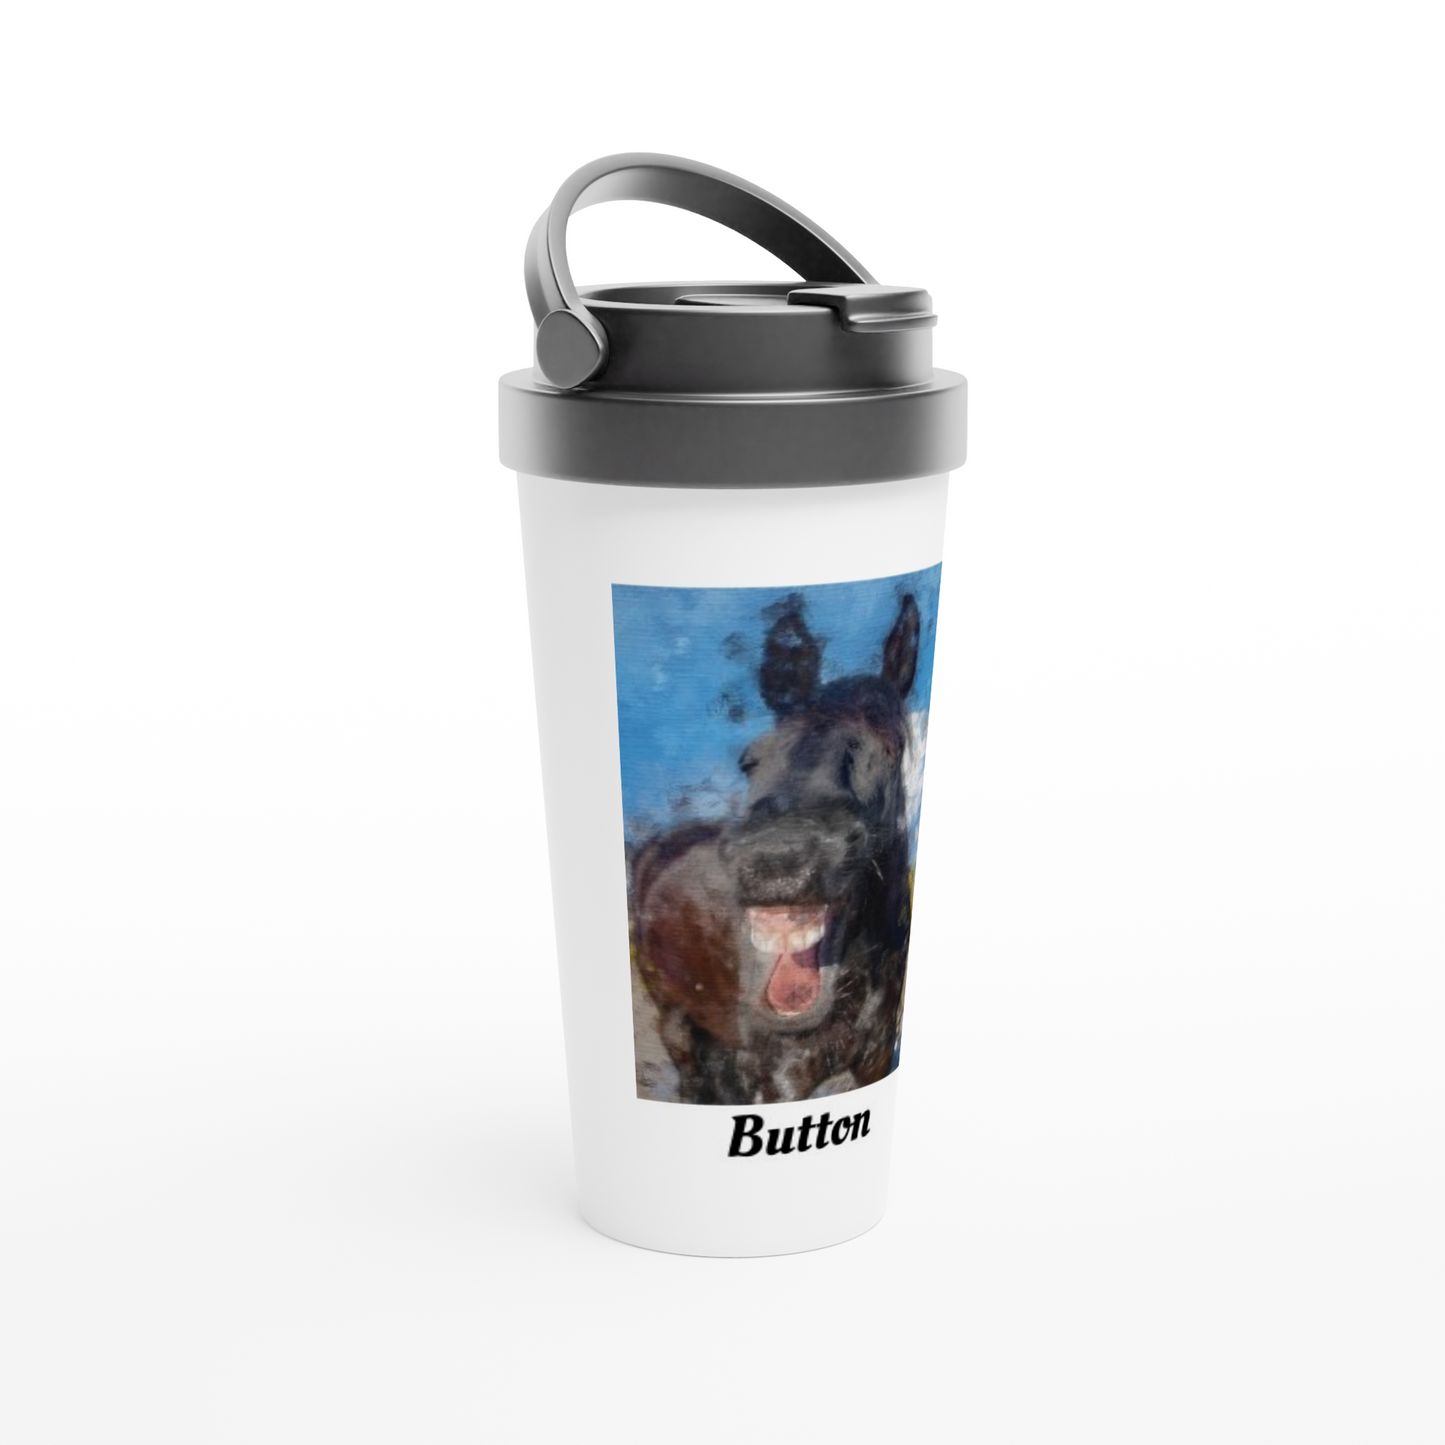 Hand Drawn Horse - 15oz Stainless Steel Travel Mug- Oil Painting - Personalized